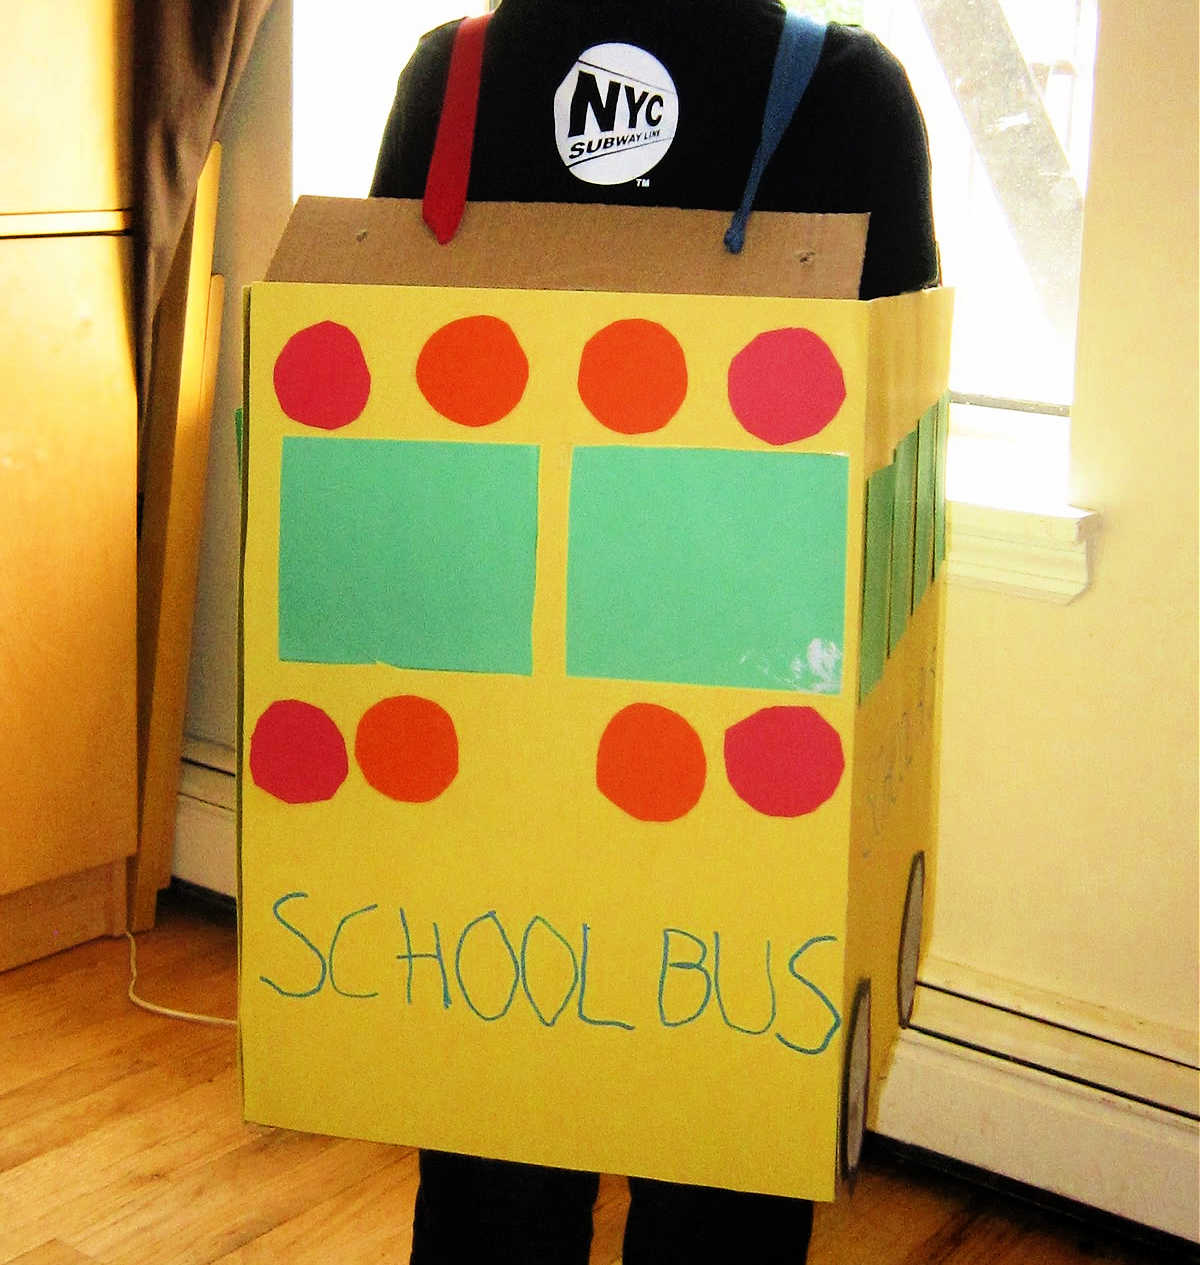 Back view of Child wearing school bus costume made from cardboard box